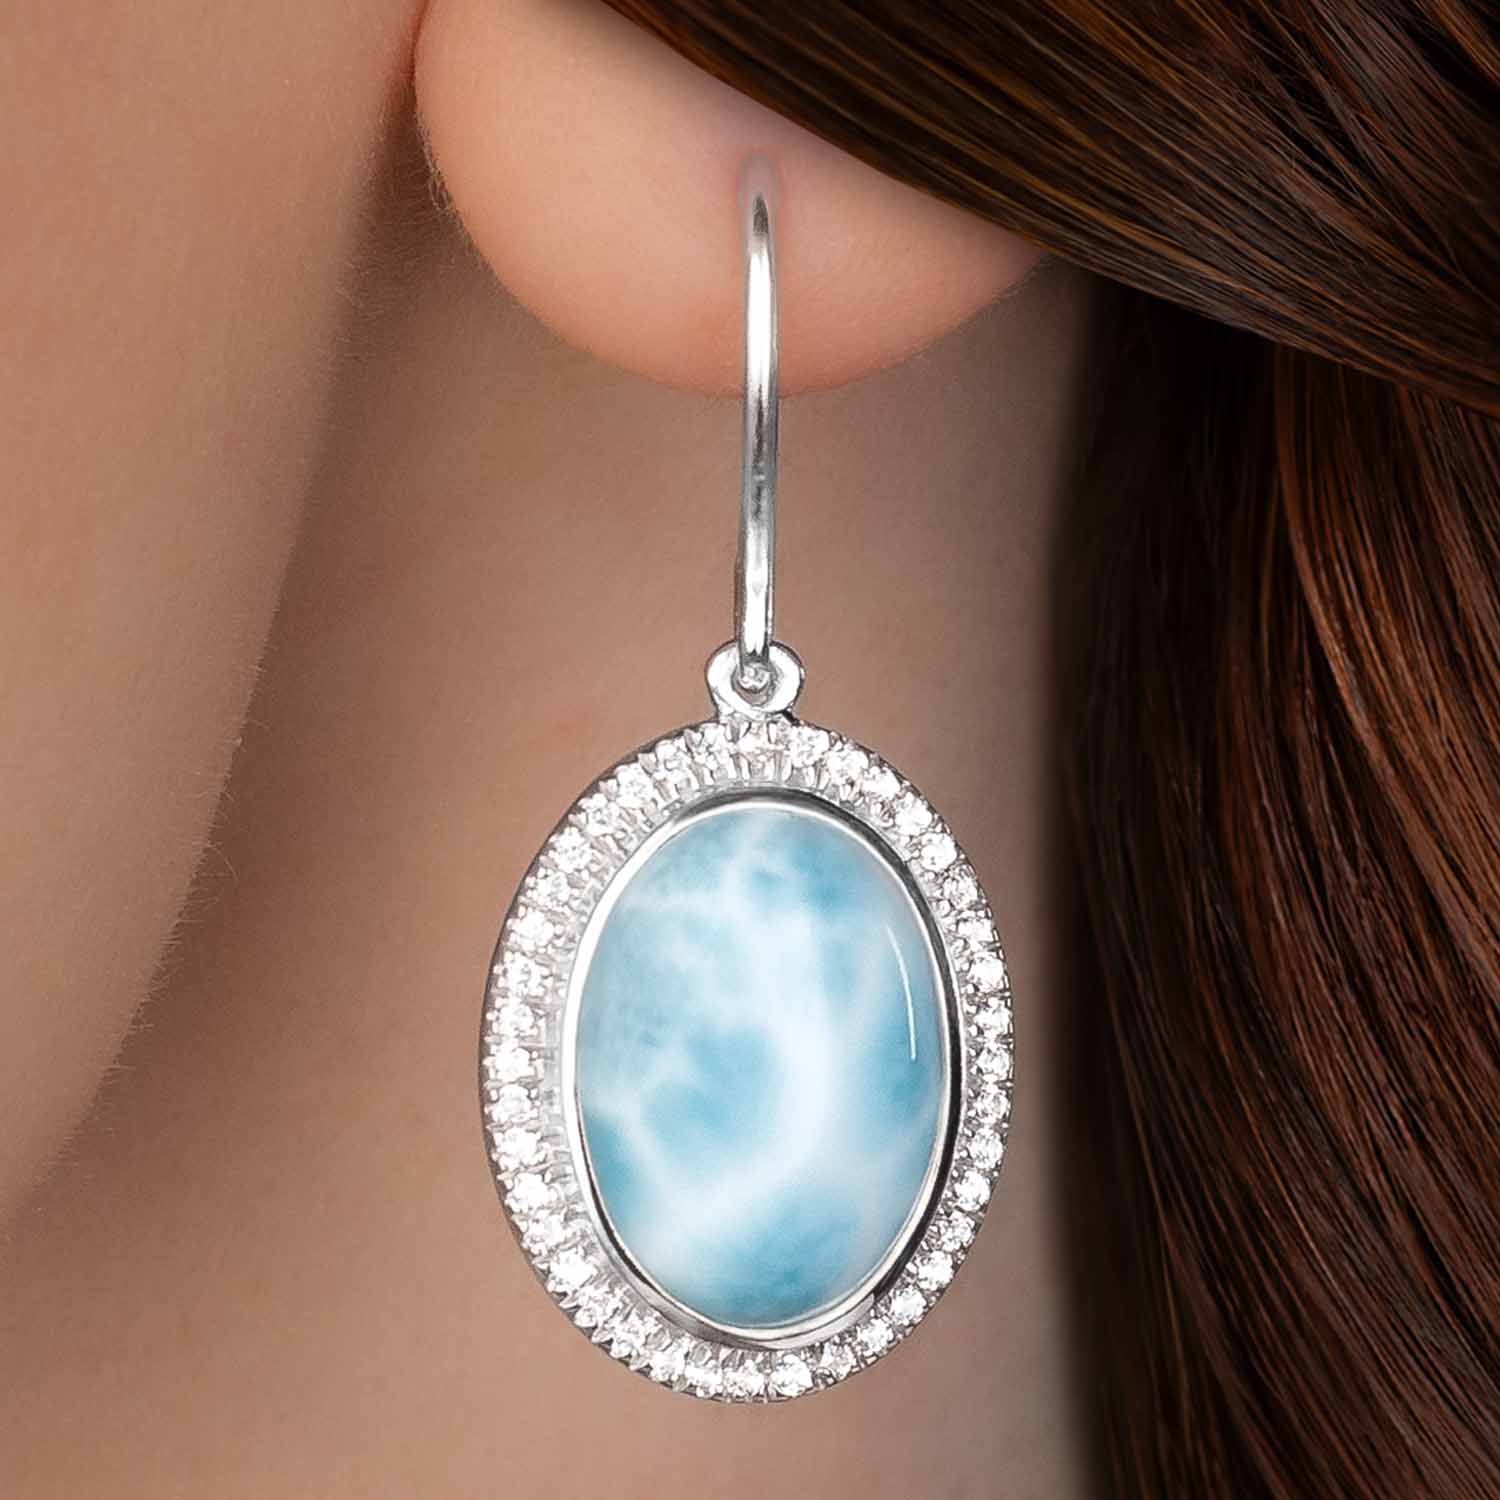 Halo Earrings with larimar and sapphire by marahlago